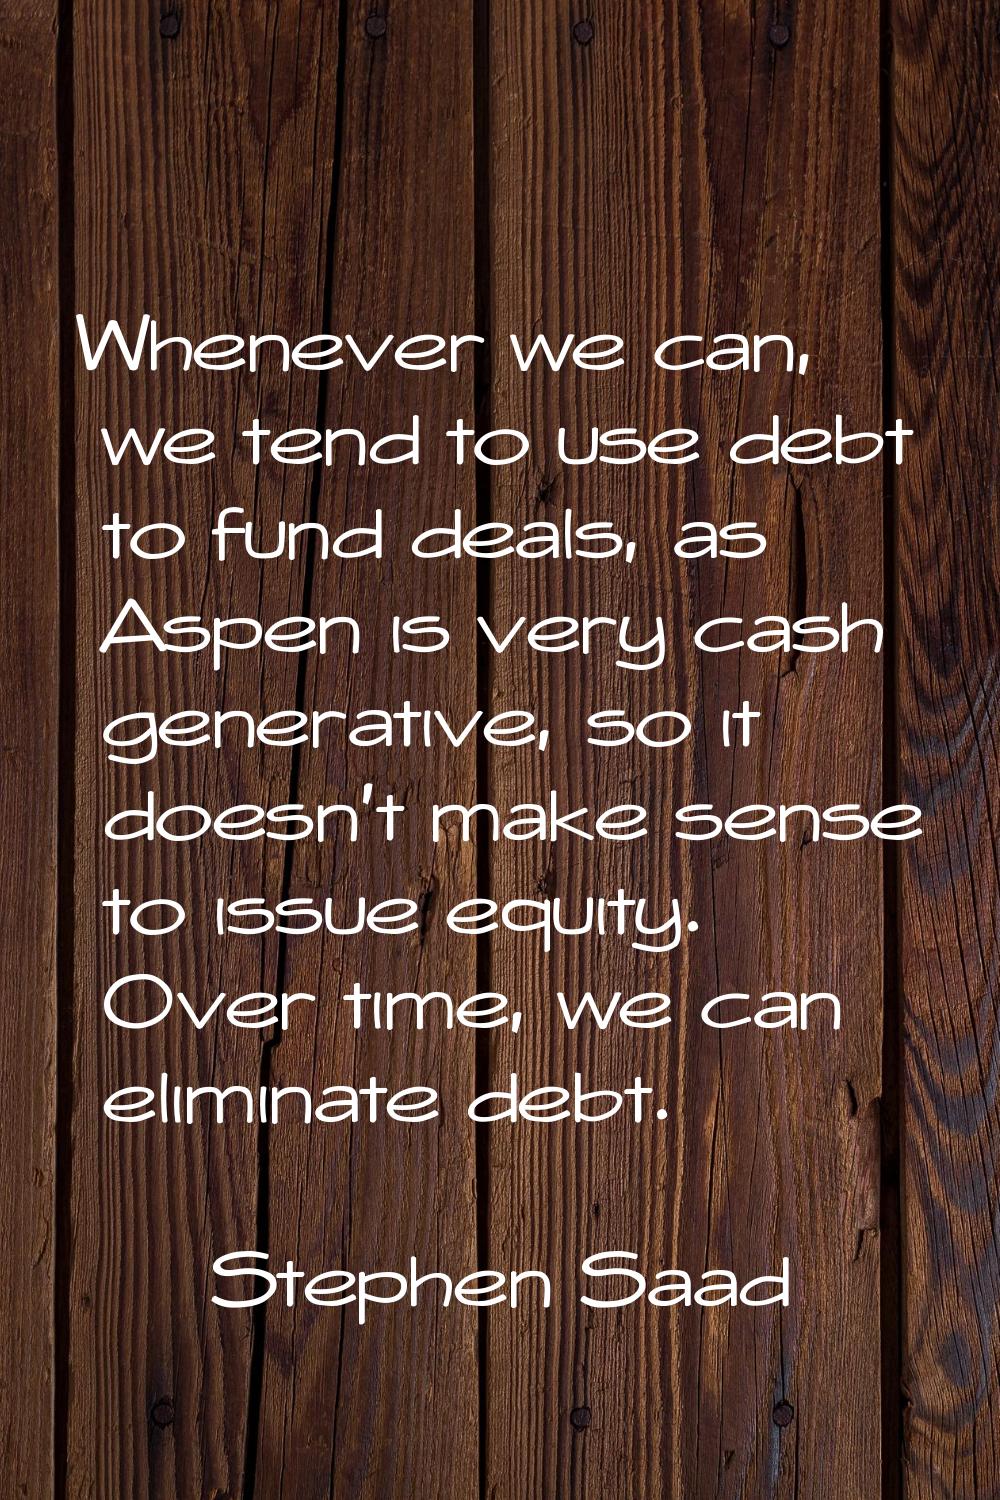 Whenever we can, we tend to use debt to fund deals, as Aspen is very cash generative, so it doesn't